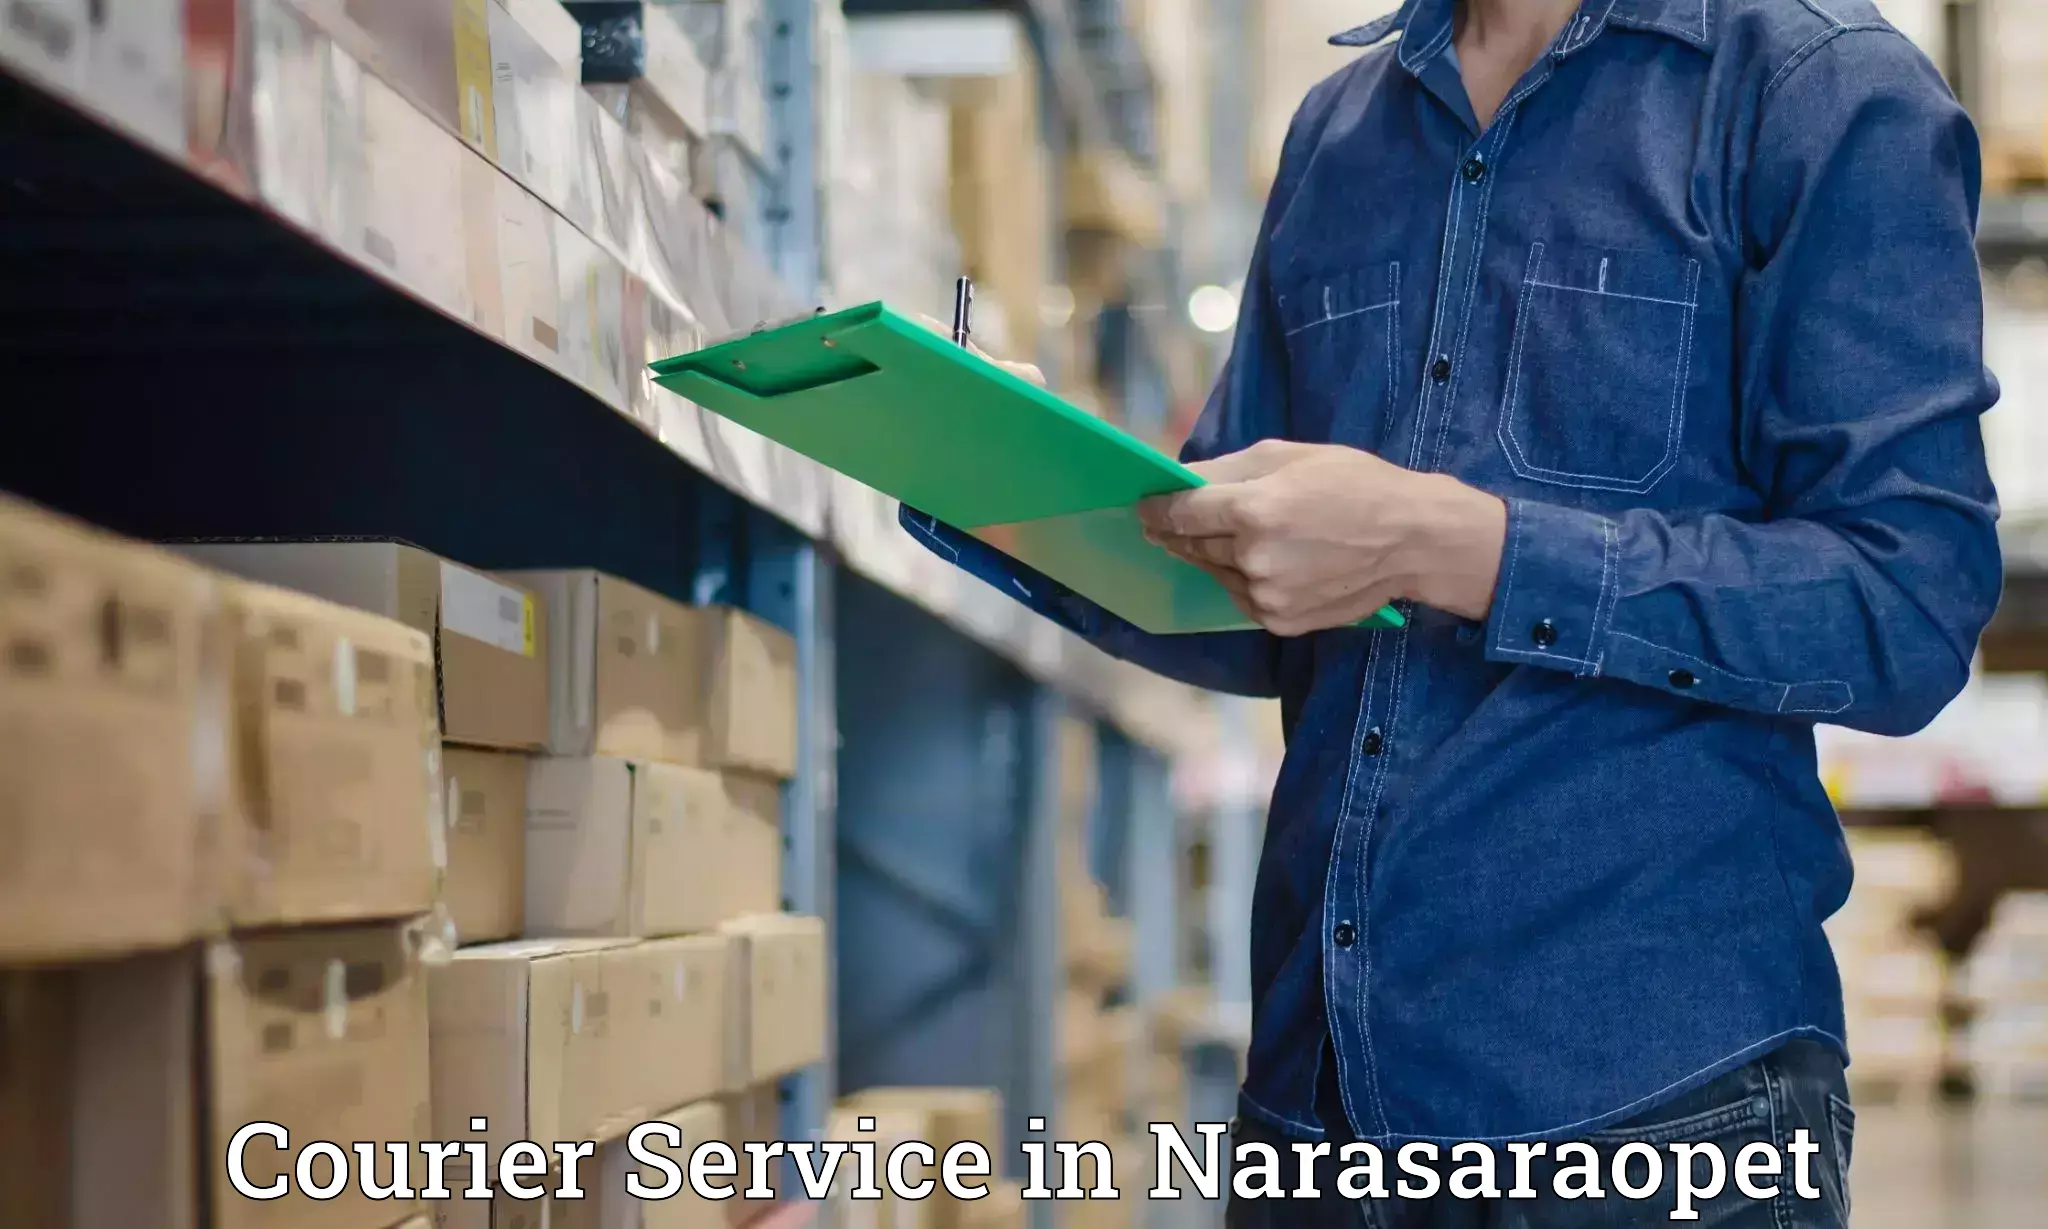 Multi-national courier services in Narasaraopet